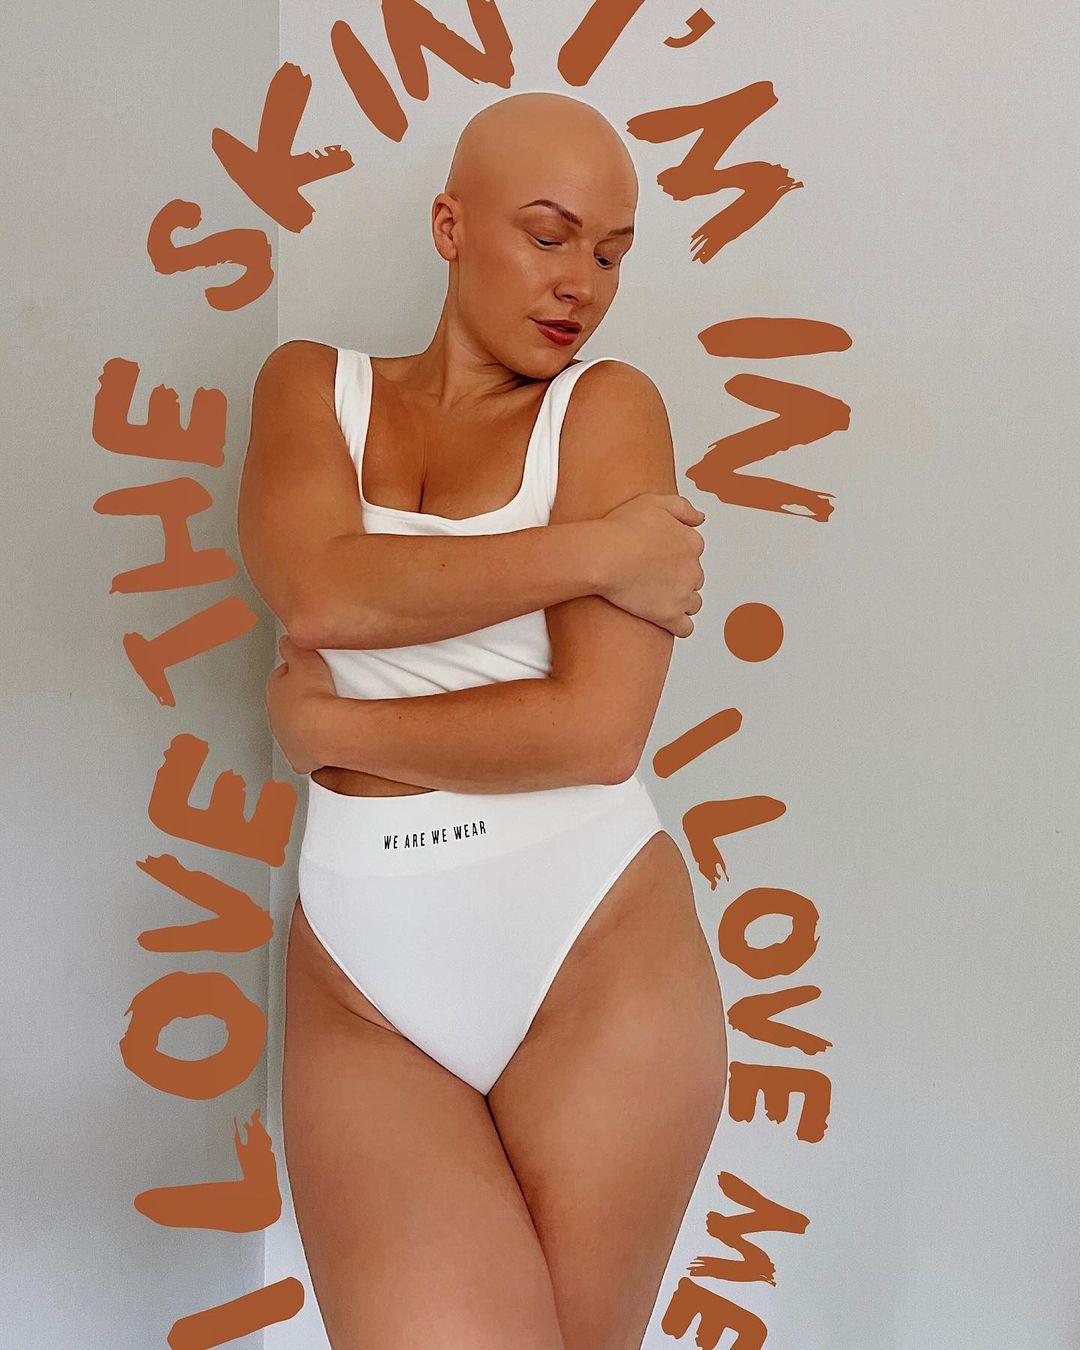 The Best Body Positive Influencers To Follow On Social Media Hitched